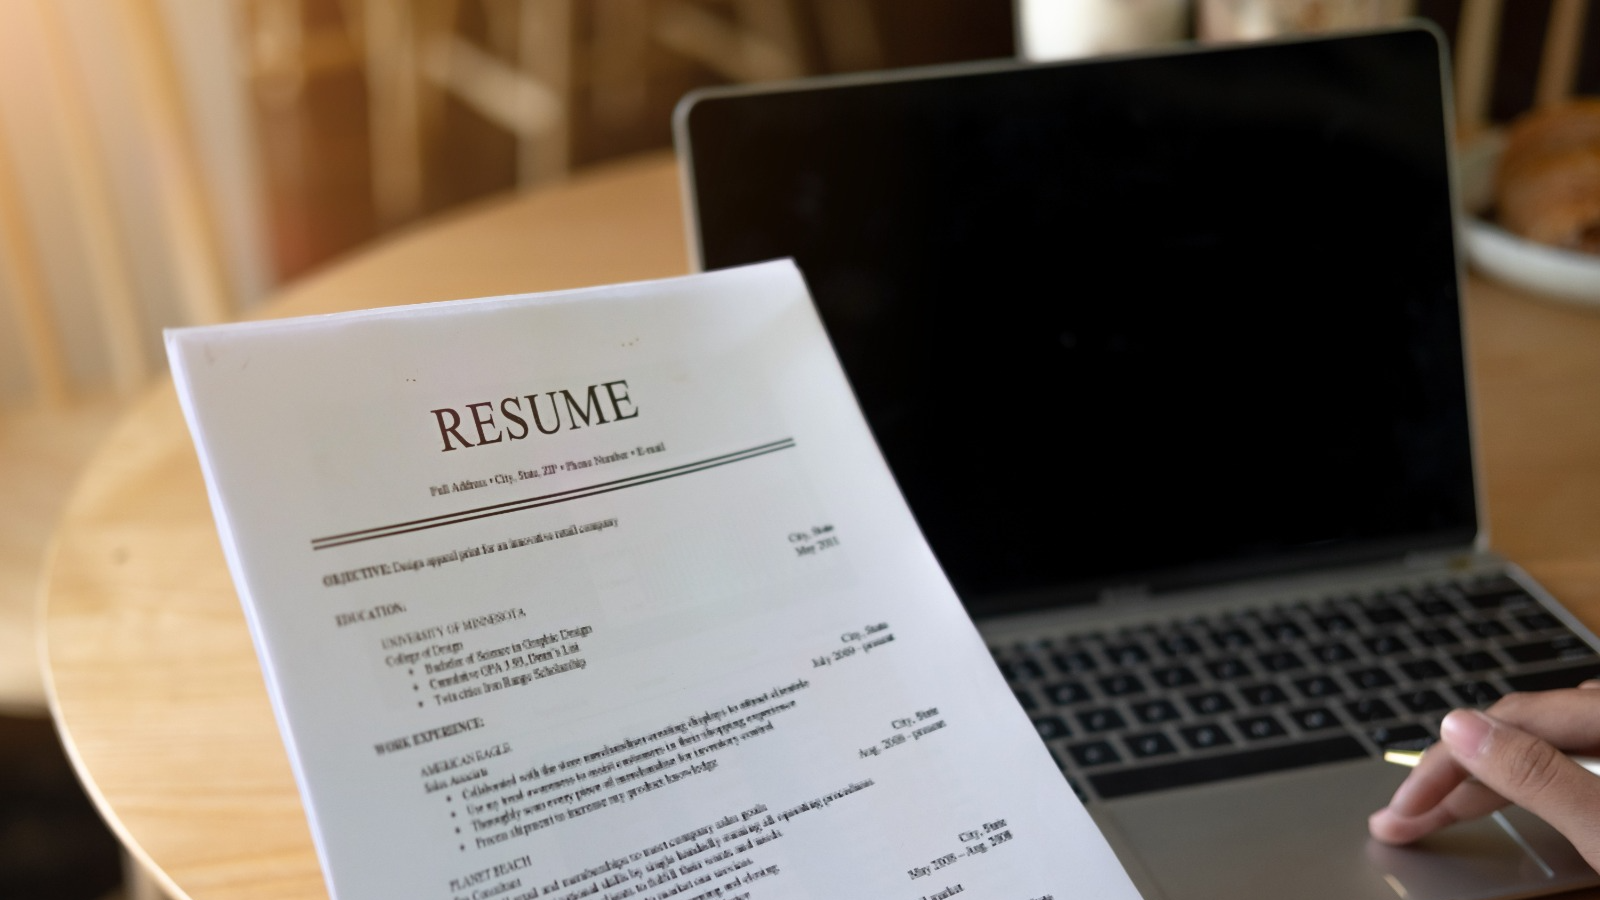 HOW TO CREATE A GOOD RESUME?